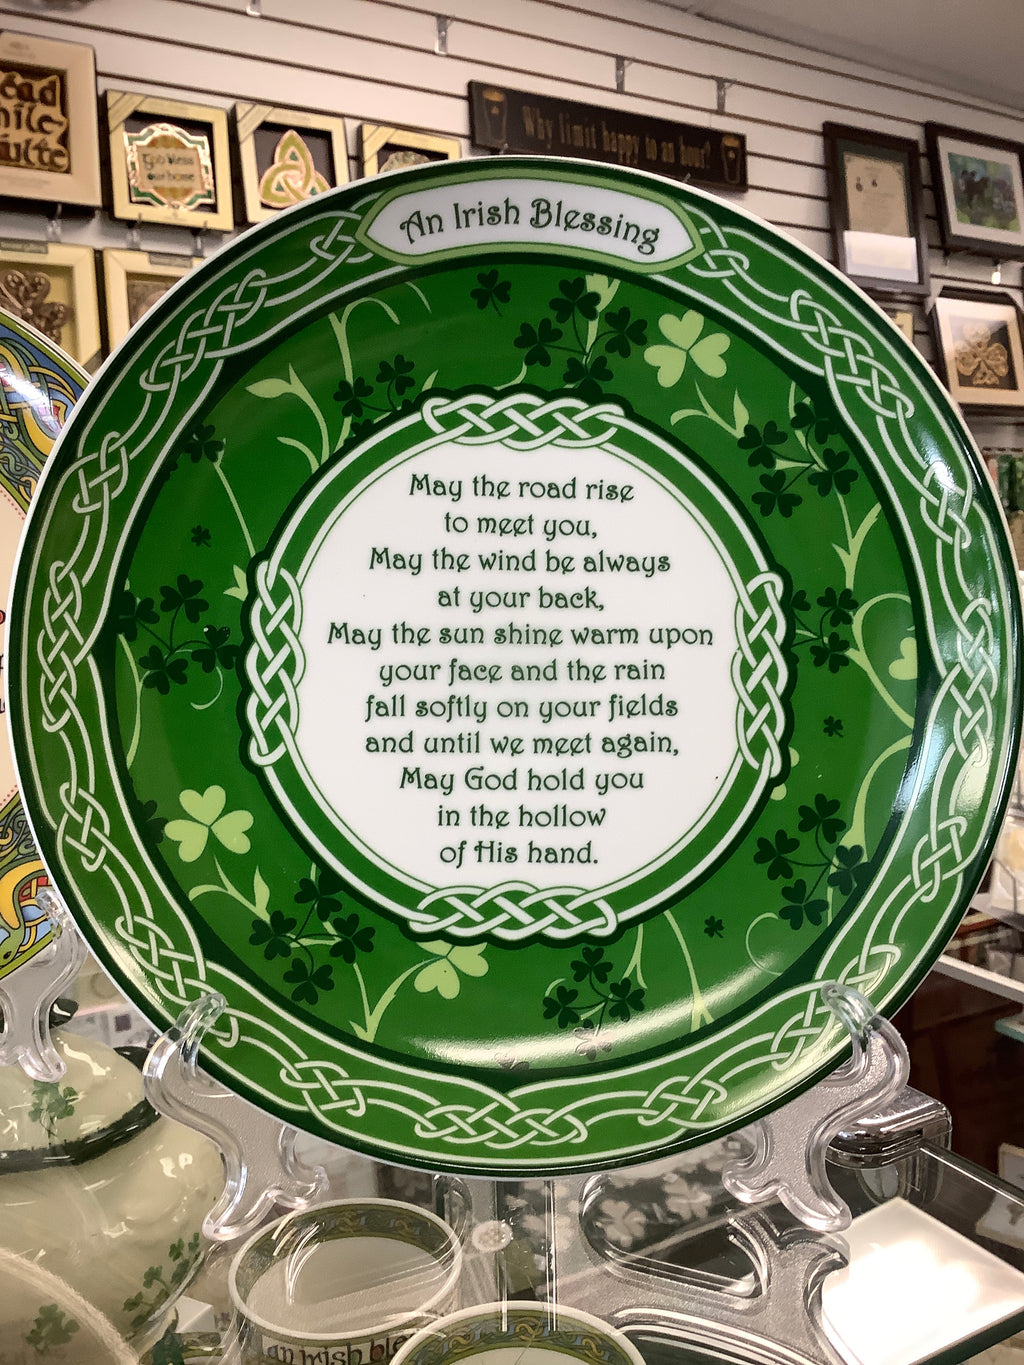 An Irish blessing shamrock plate with stand